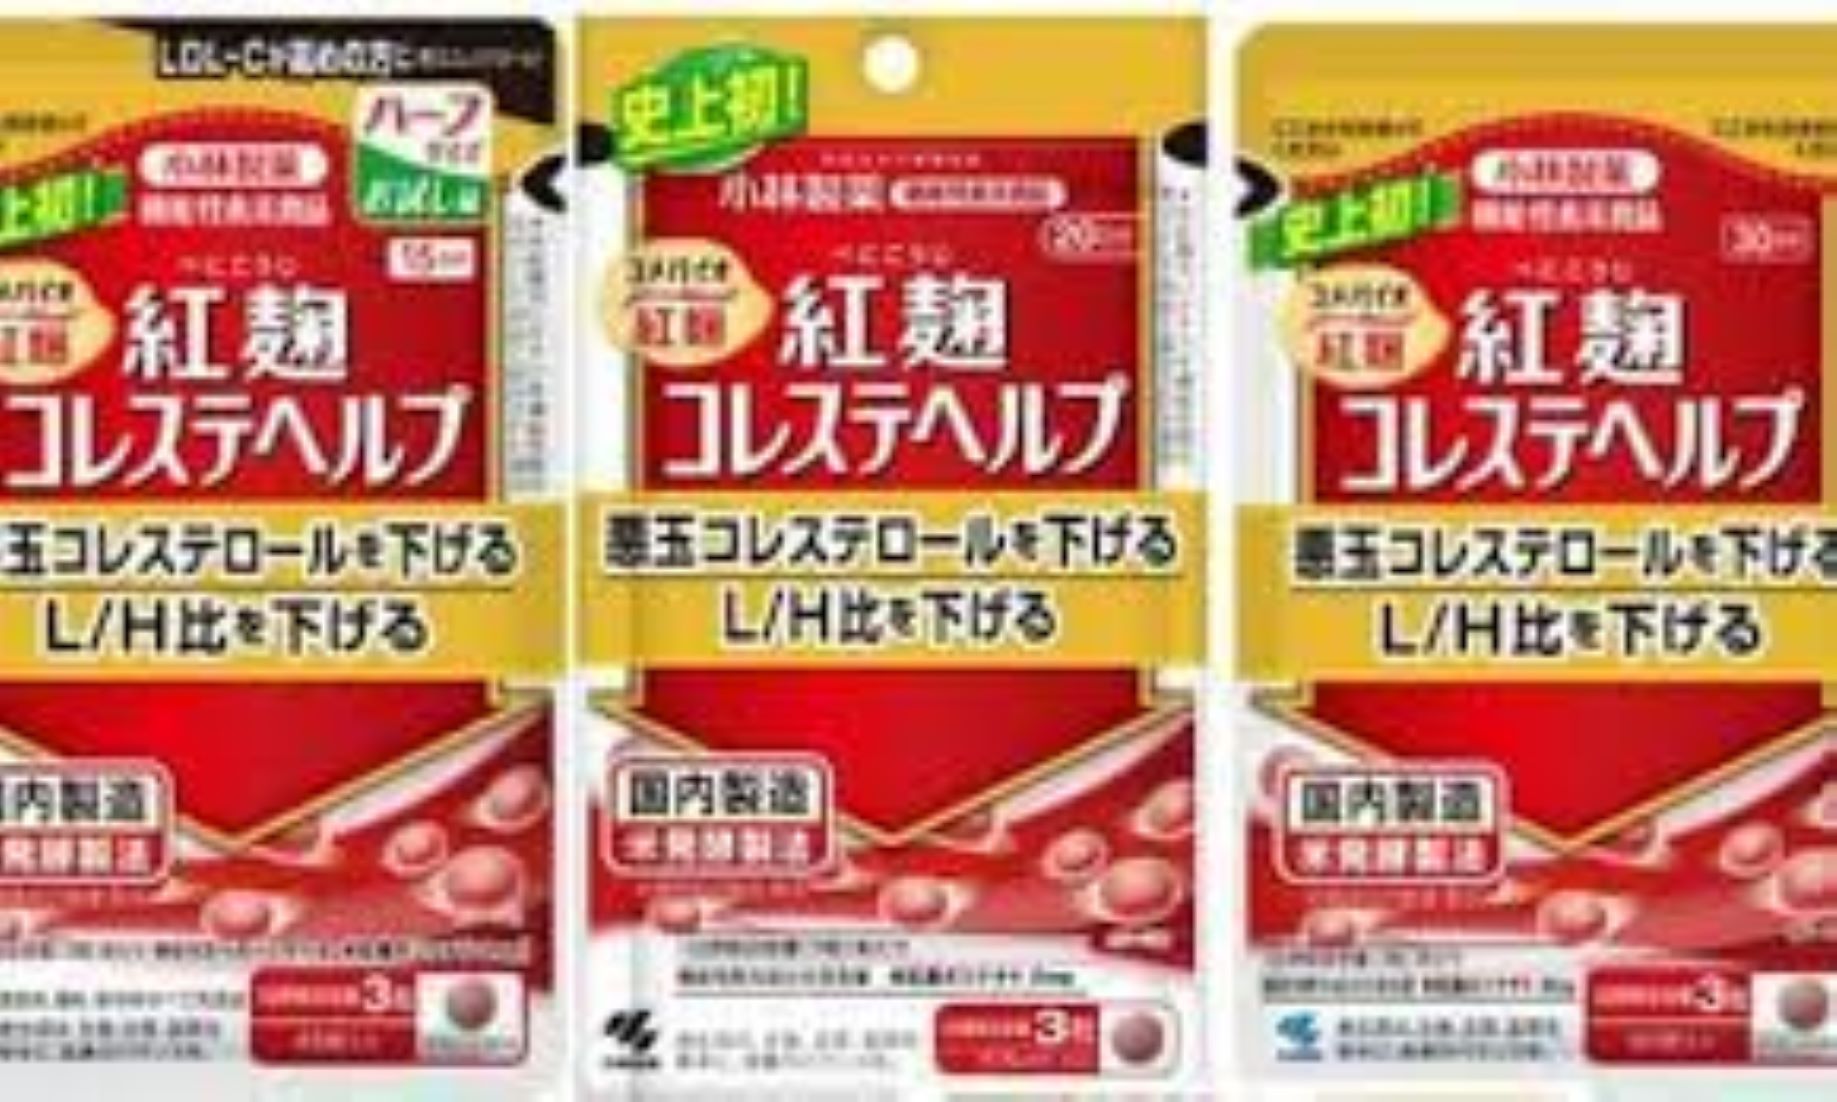 Japan Drugmaker Confirms Four Deaths Over Red Yeast Rice Supplement Intake